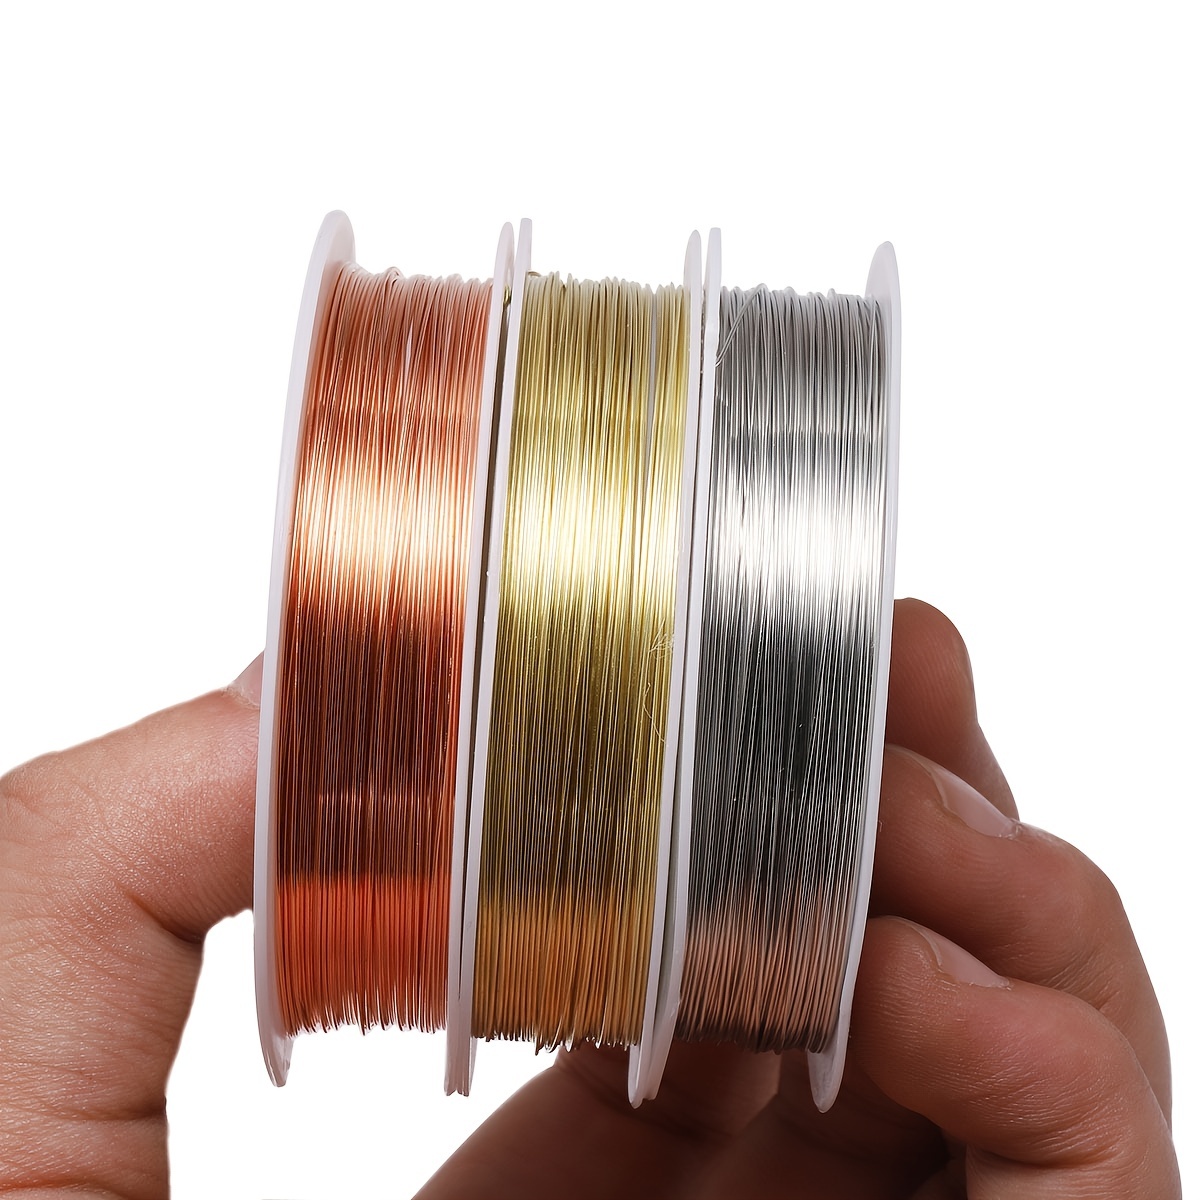 22 Gauge Jewelry Wire, Anezus Craft Wire Tarnish Resistant Copper Beading  Wire for Jewelry Making Supplies and Crafting